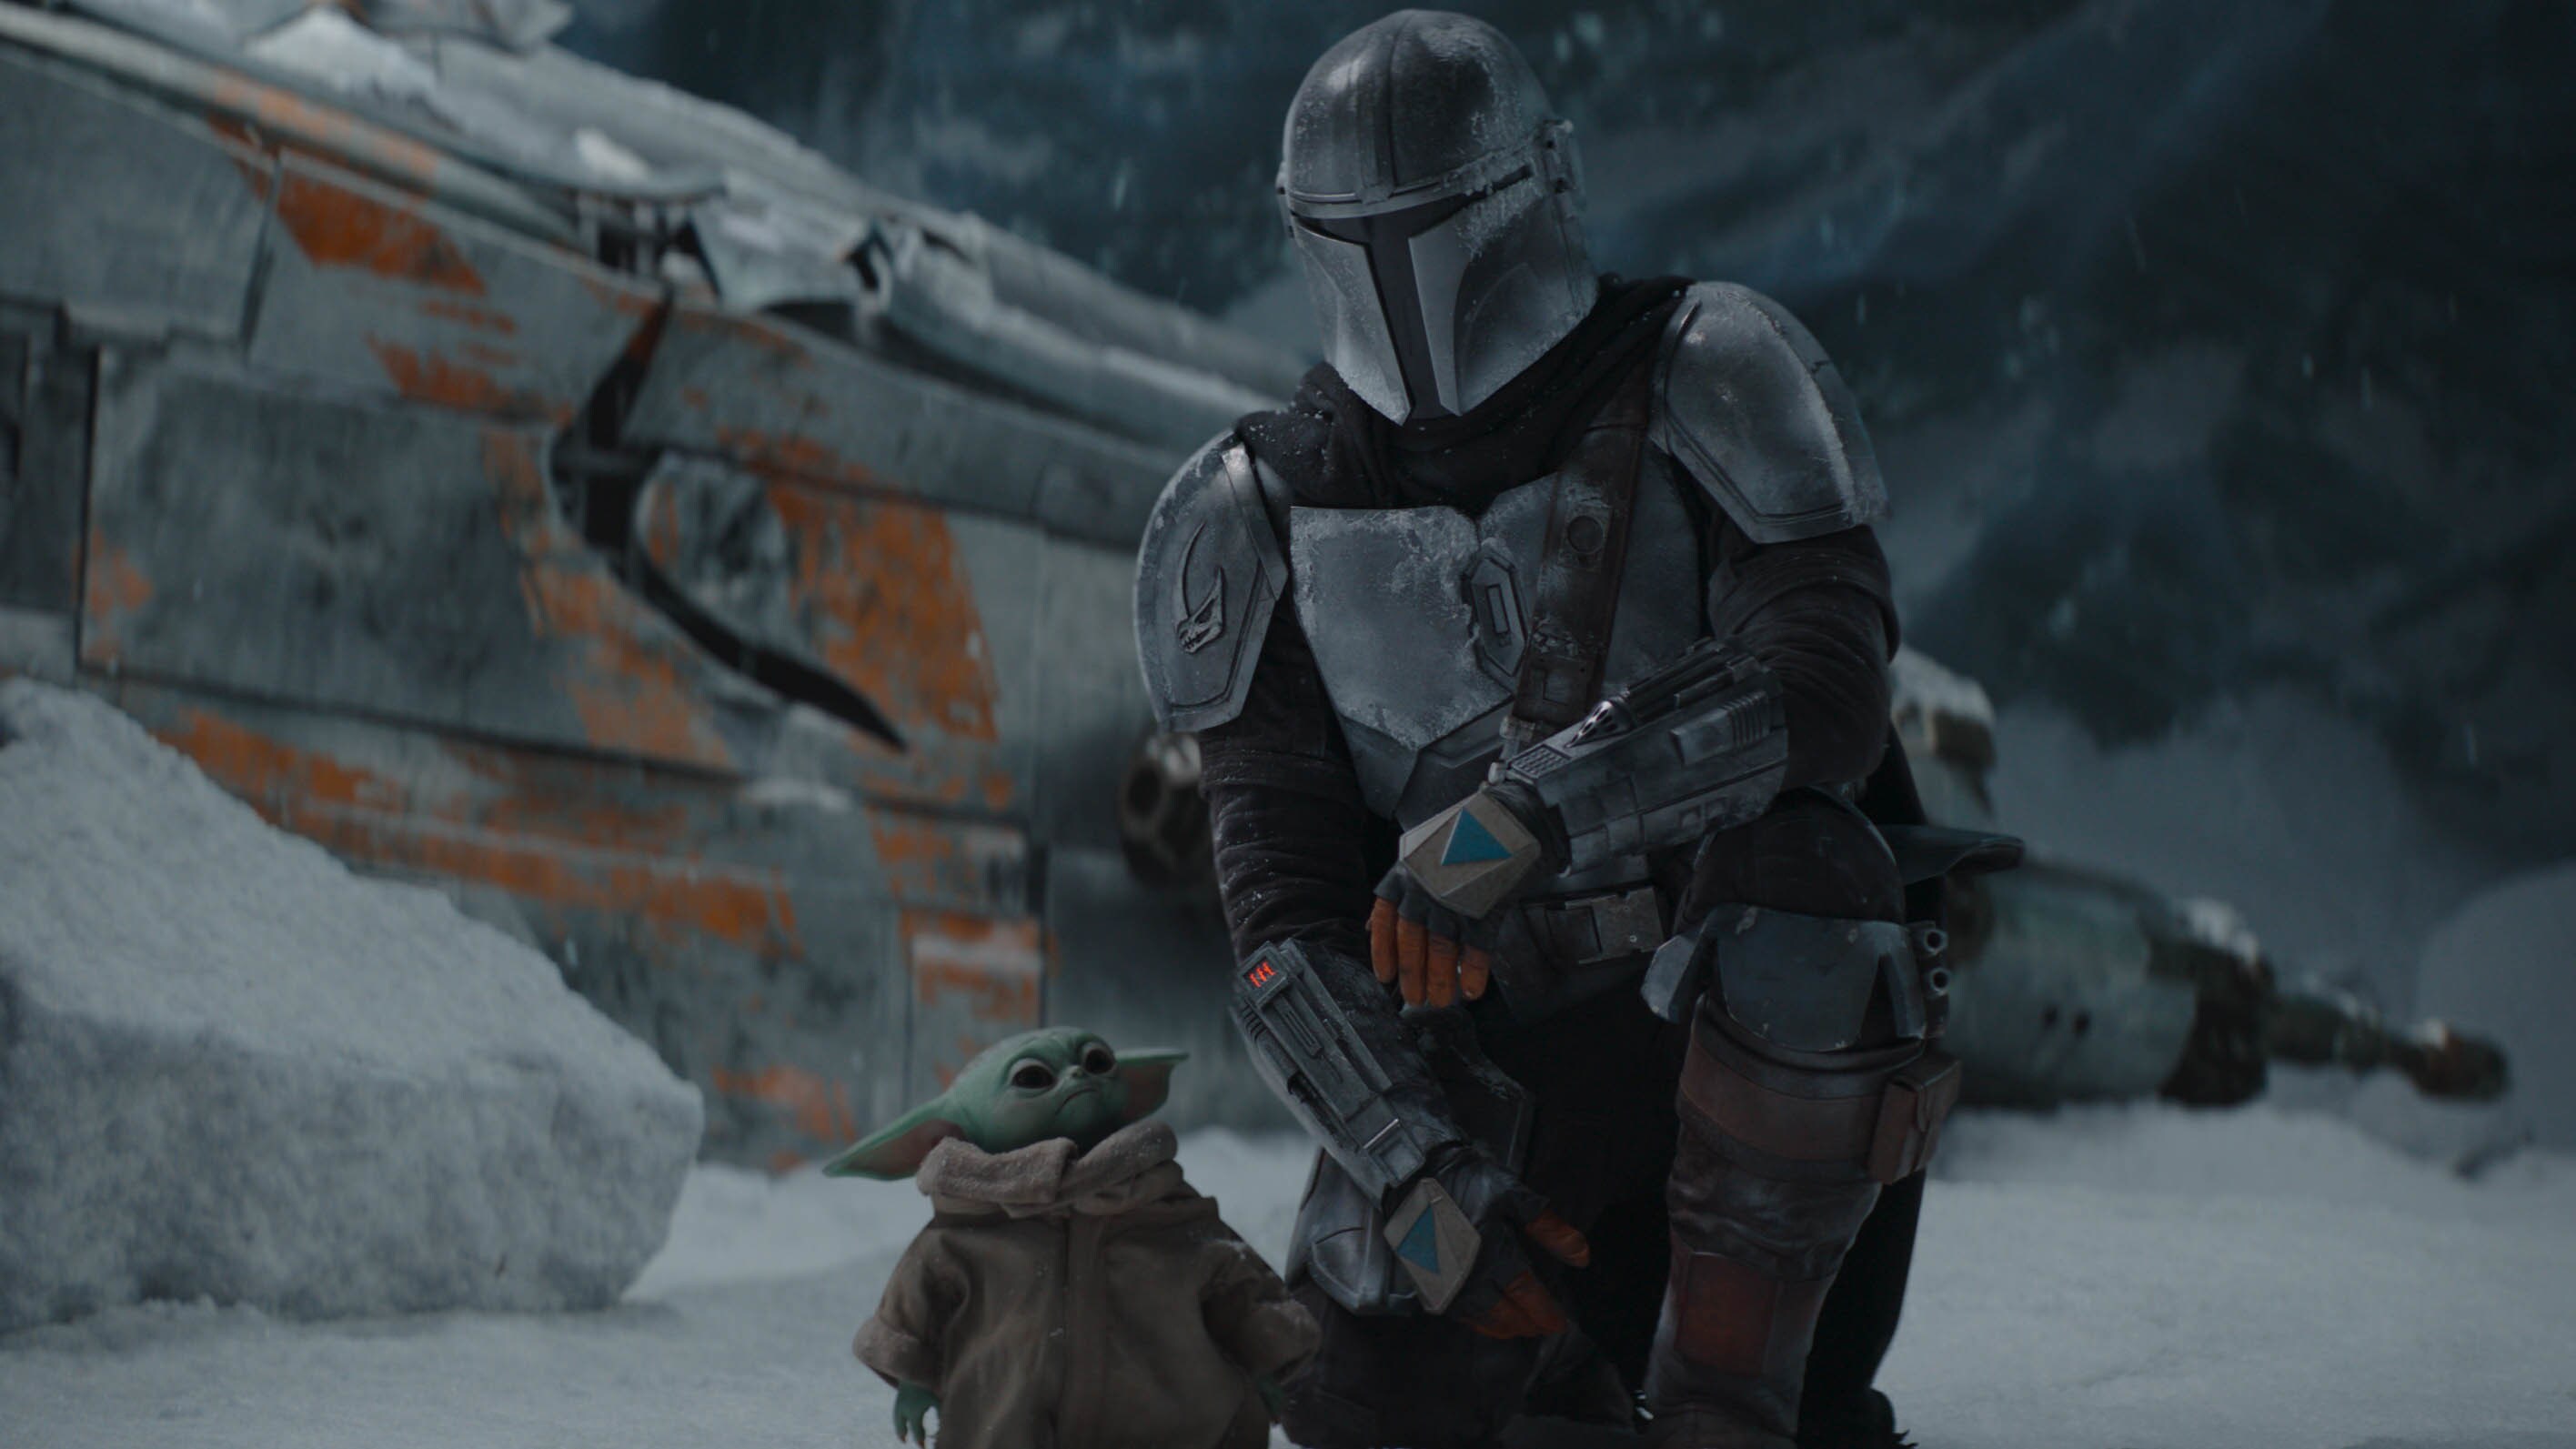 The Mandalorian (Pedro Pascal) and the Child in THE MANDALORIAN, season two. © 2020 Lucasfilm Ltd. & TM. All Rights Reserved.